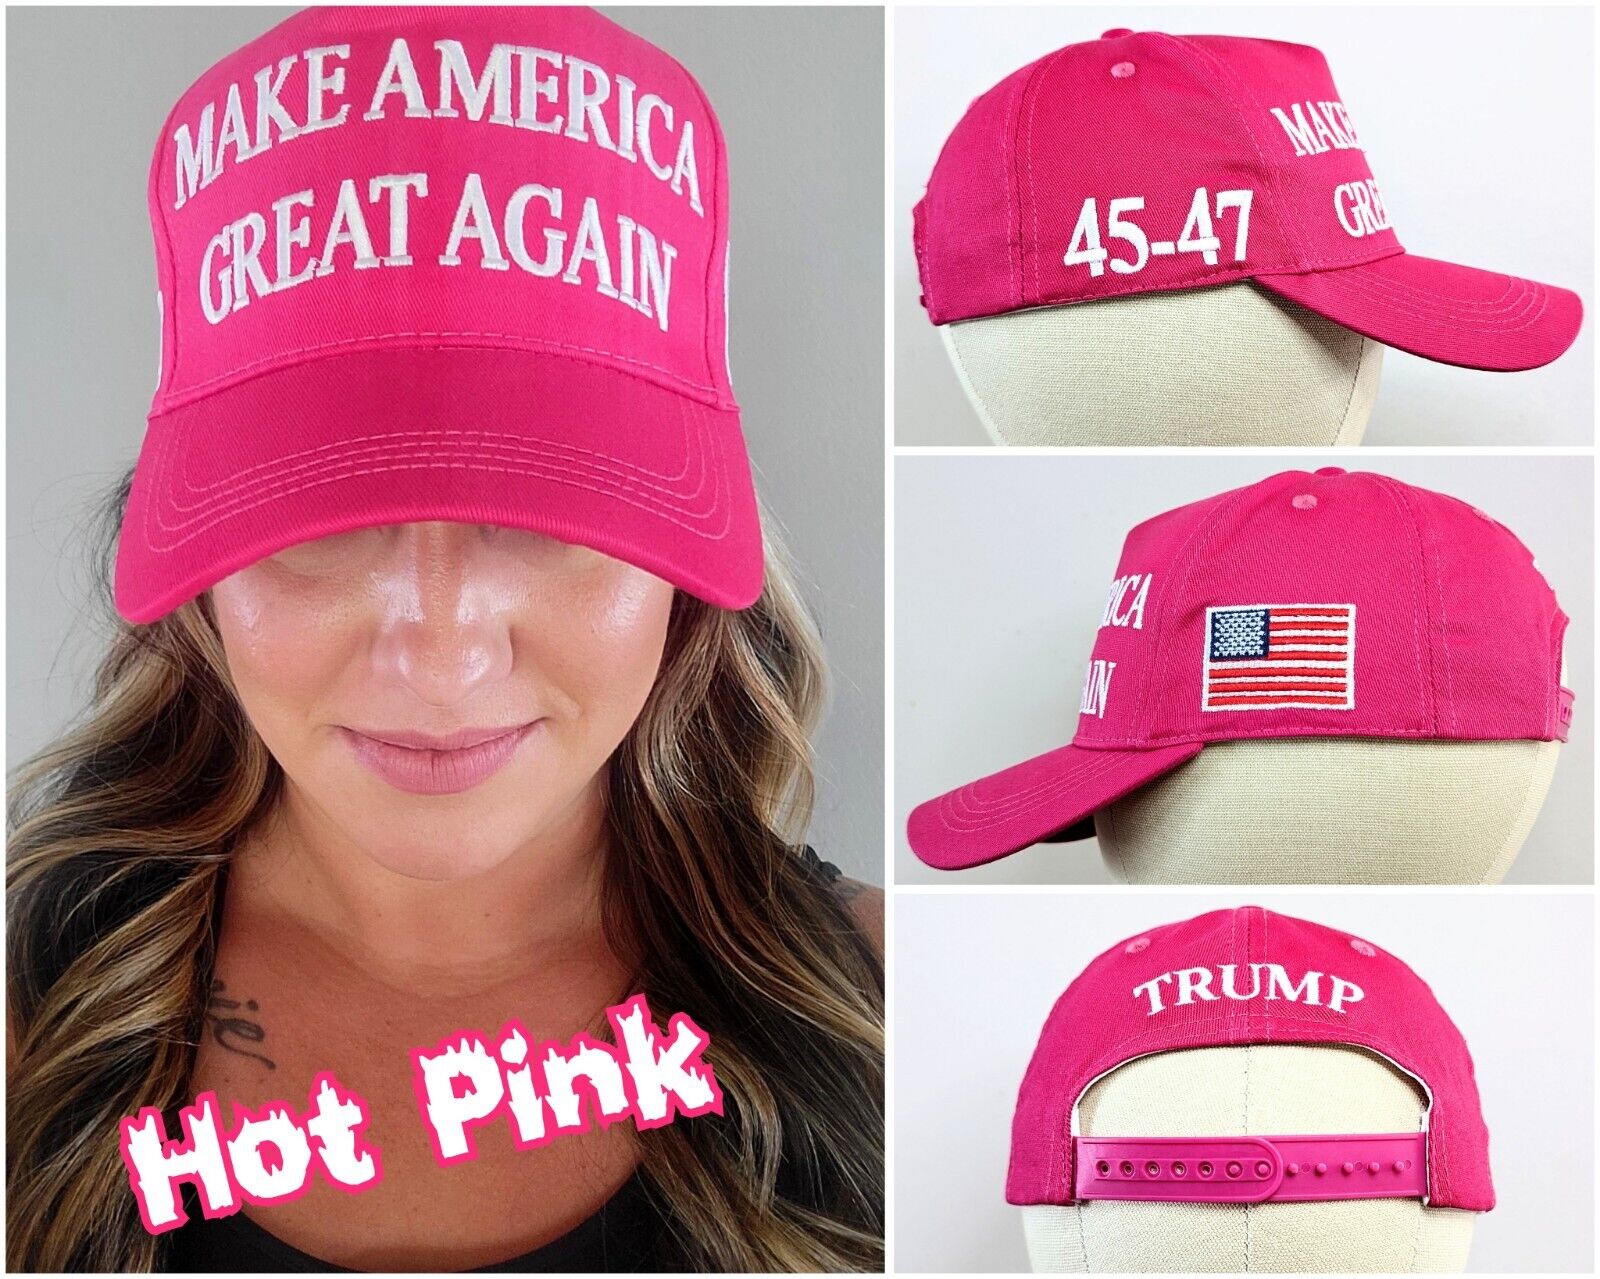 Hot Pink & White Official Trump 45-47 Make America Great Again 2024 MAGA Hat